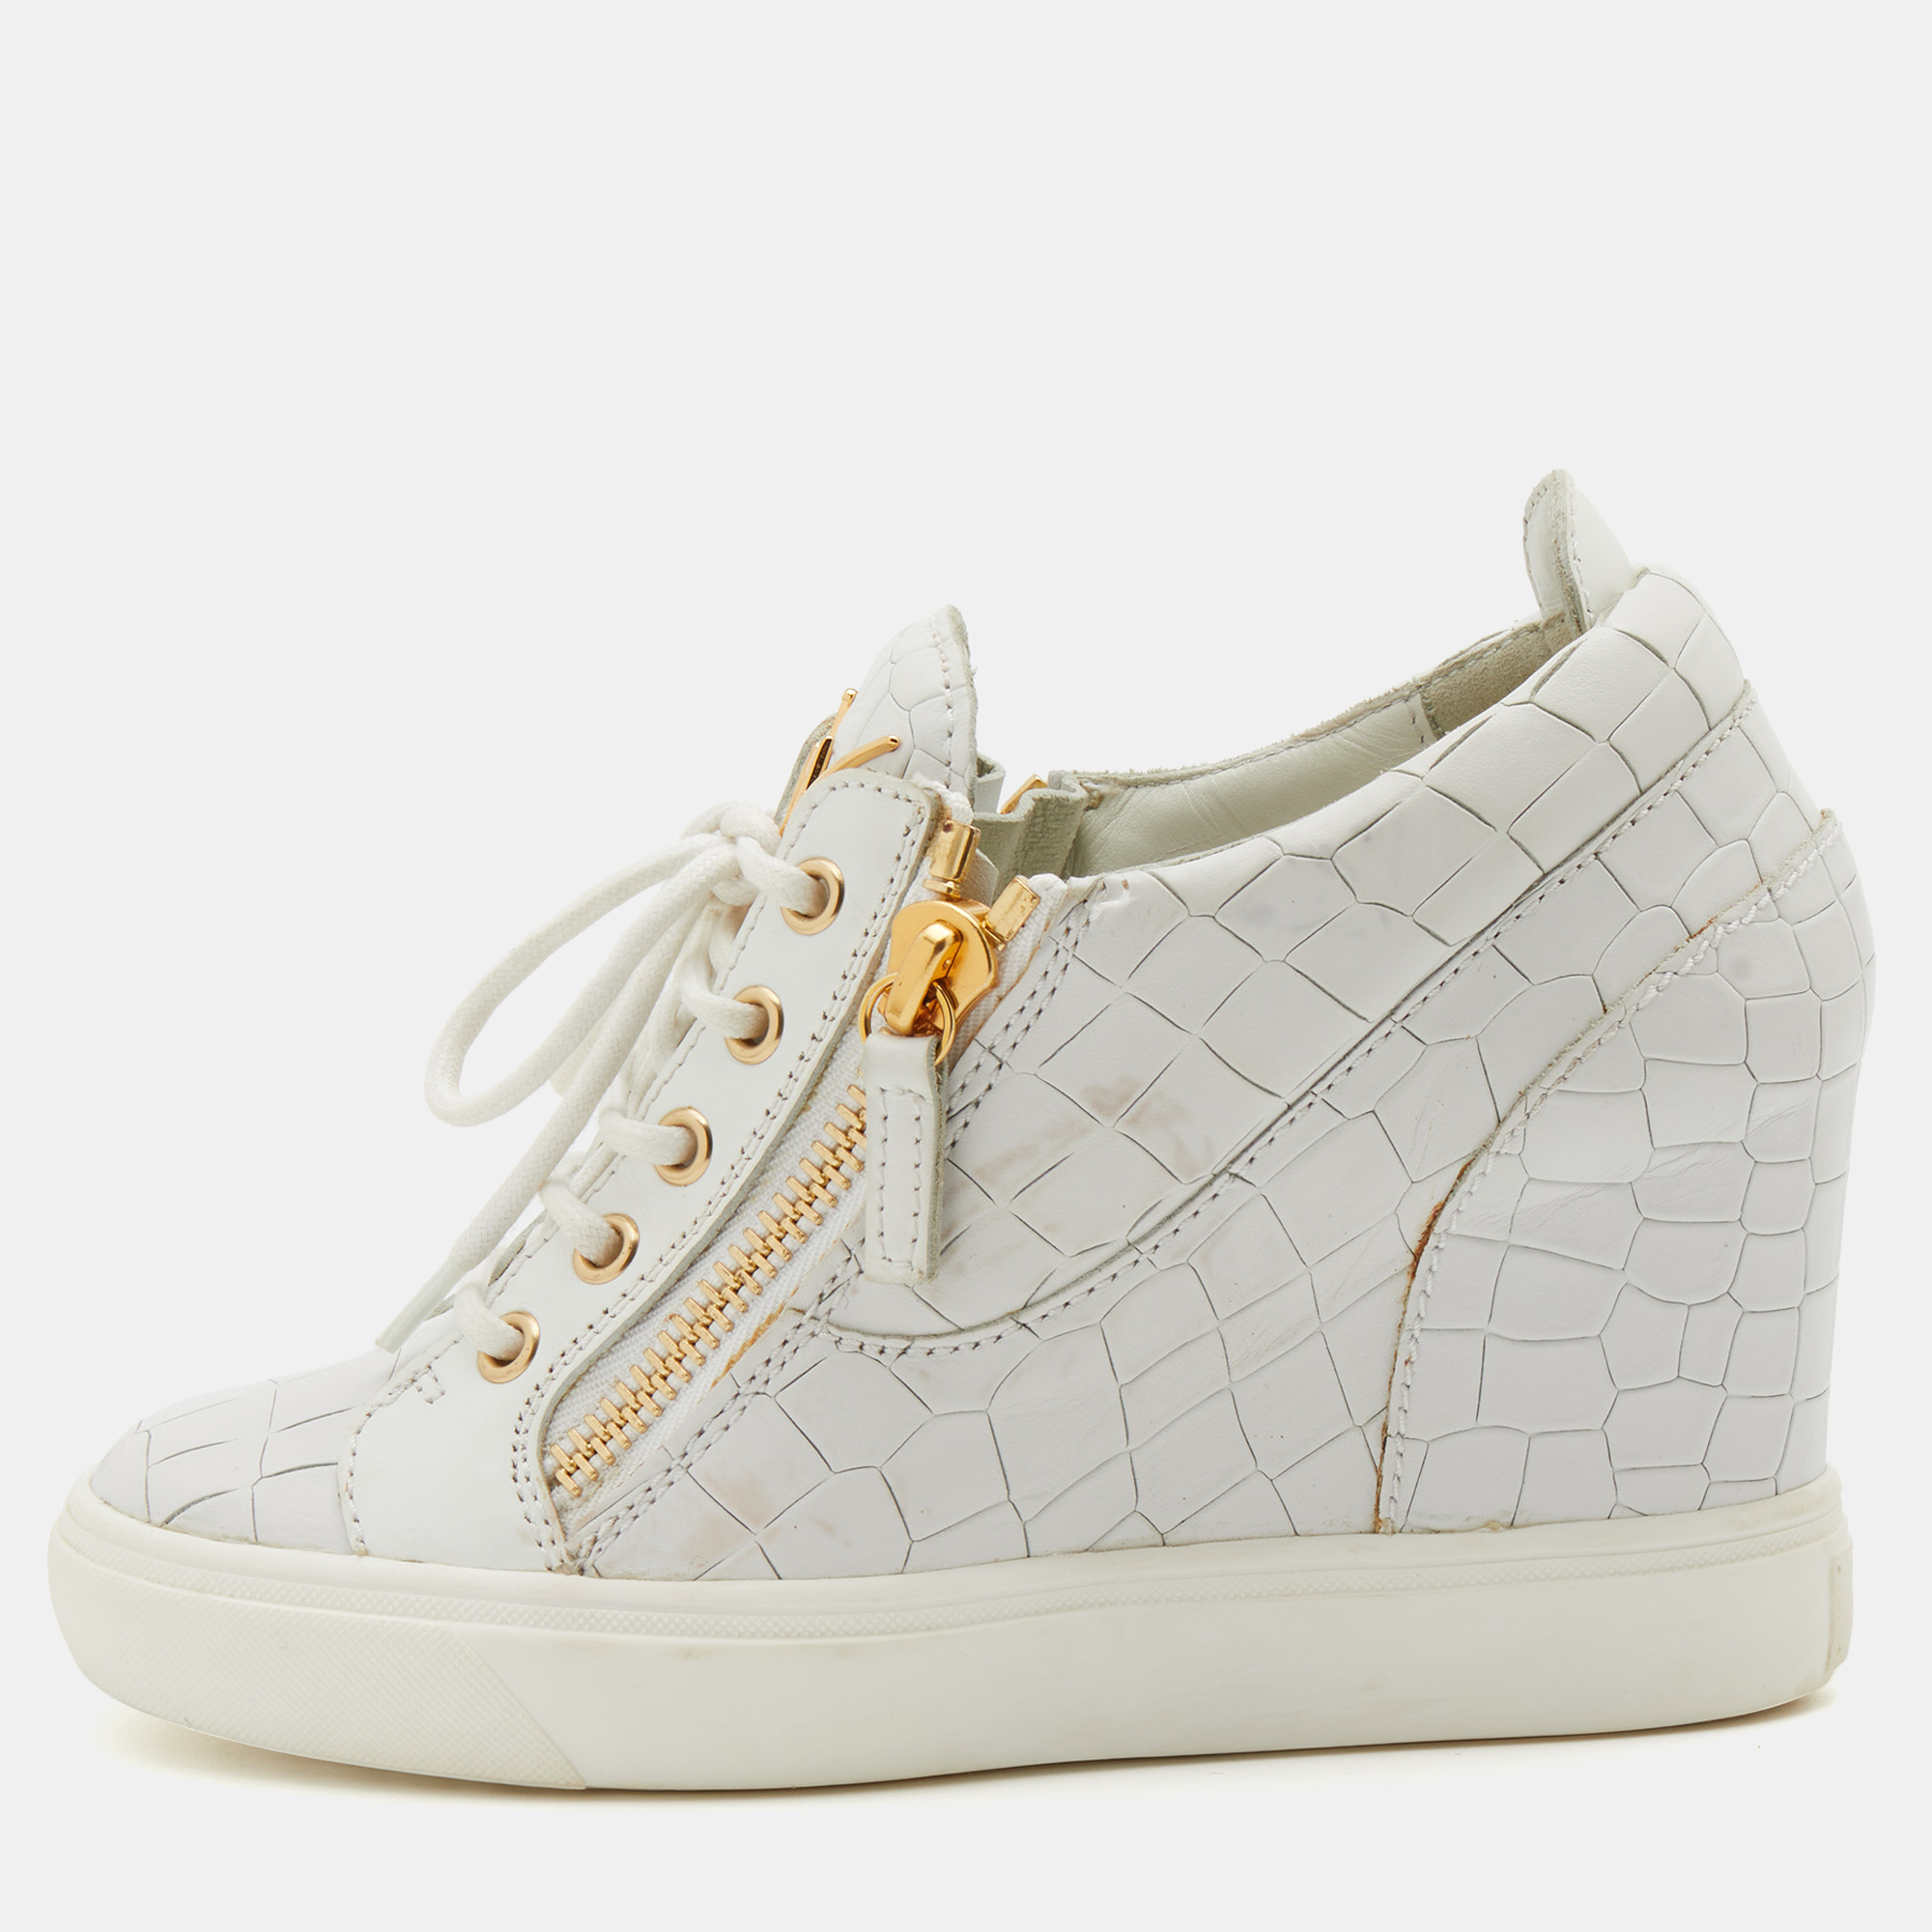 Pre-owned Giuseppe Zanotti White Croc Embossed Leather Wedge Sneakers Size 37.5